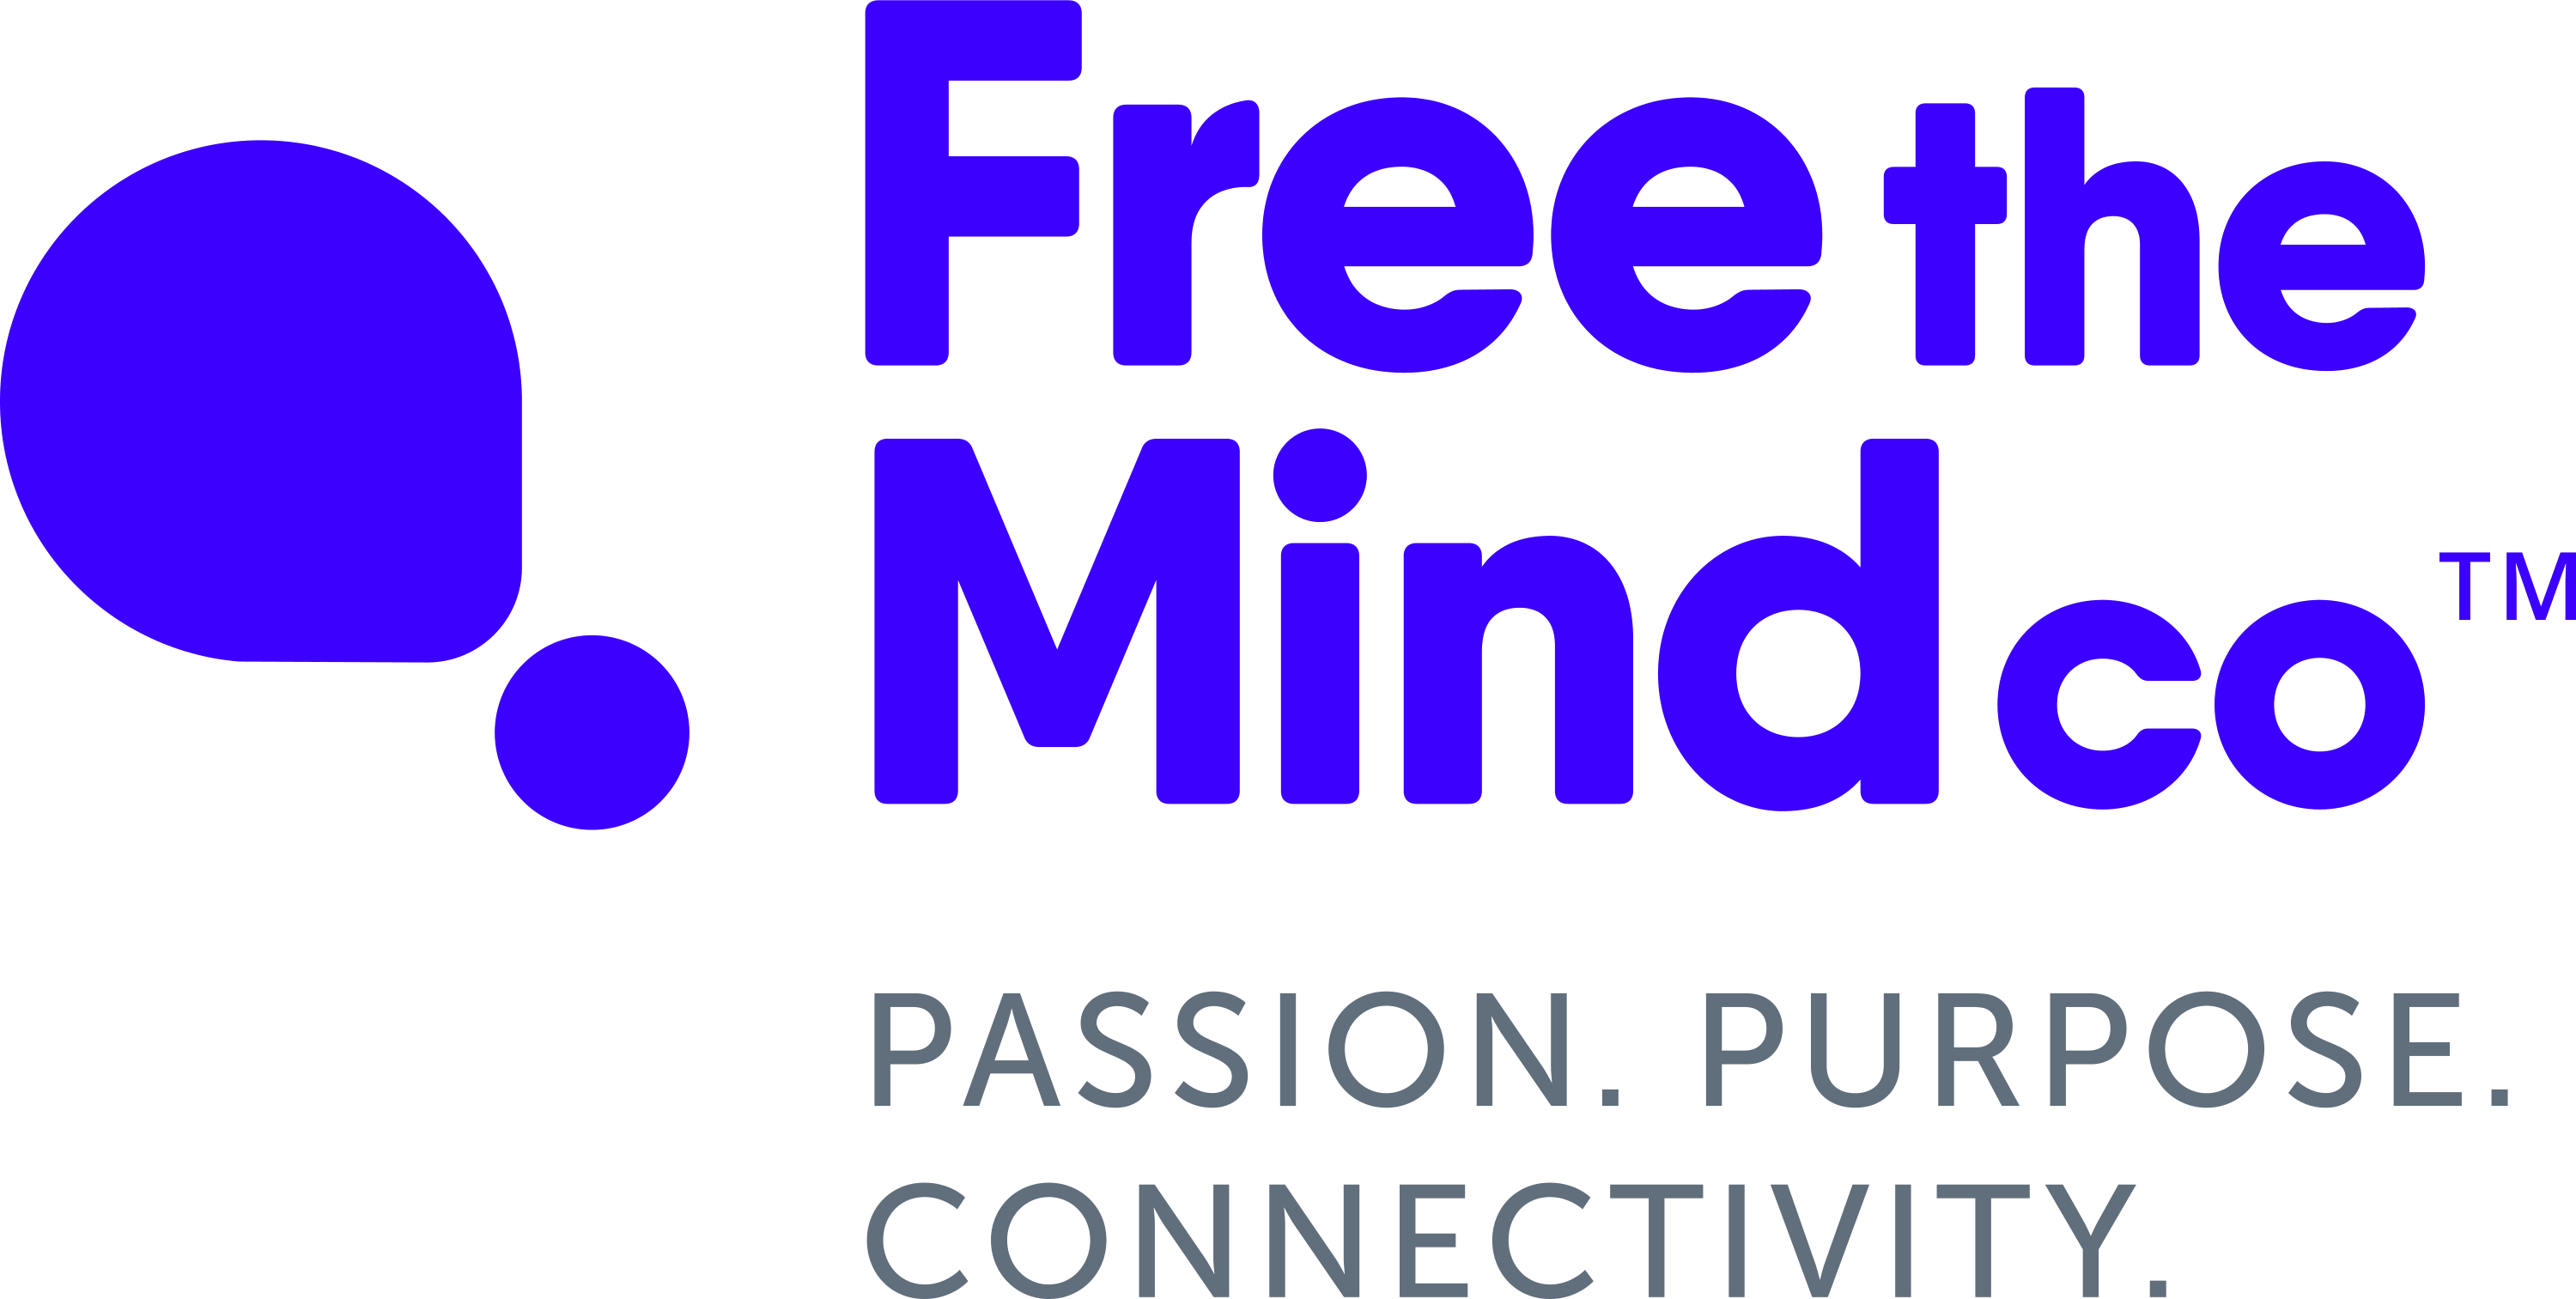 Free The Mind Co